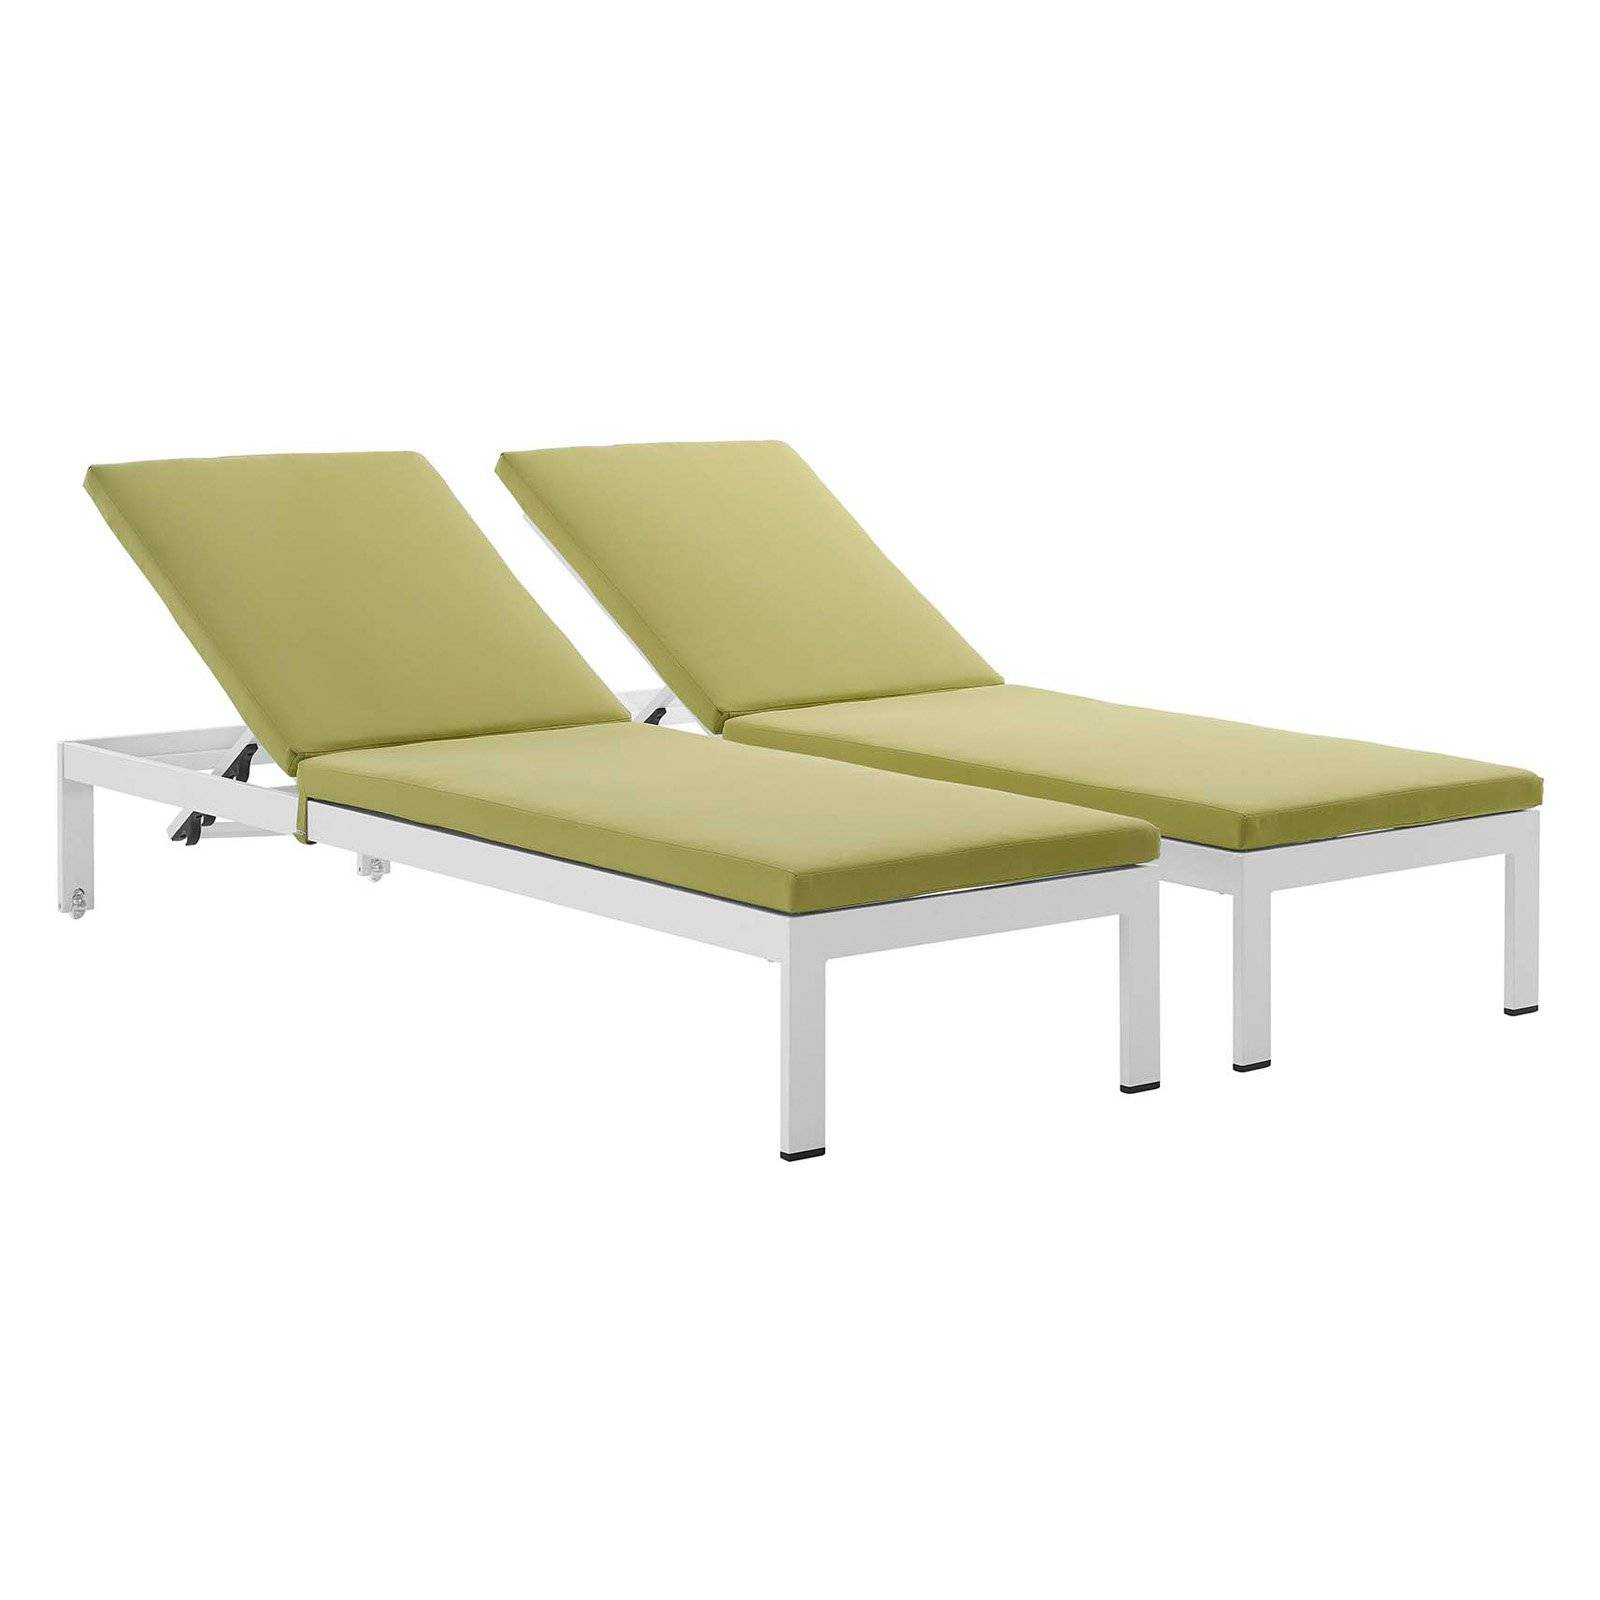 Patio Chaise Lounge Awesome Shore Aluminum Outdoor Chair inside measurements 1600 X 1600